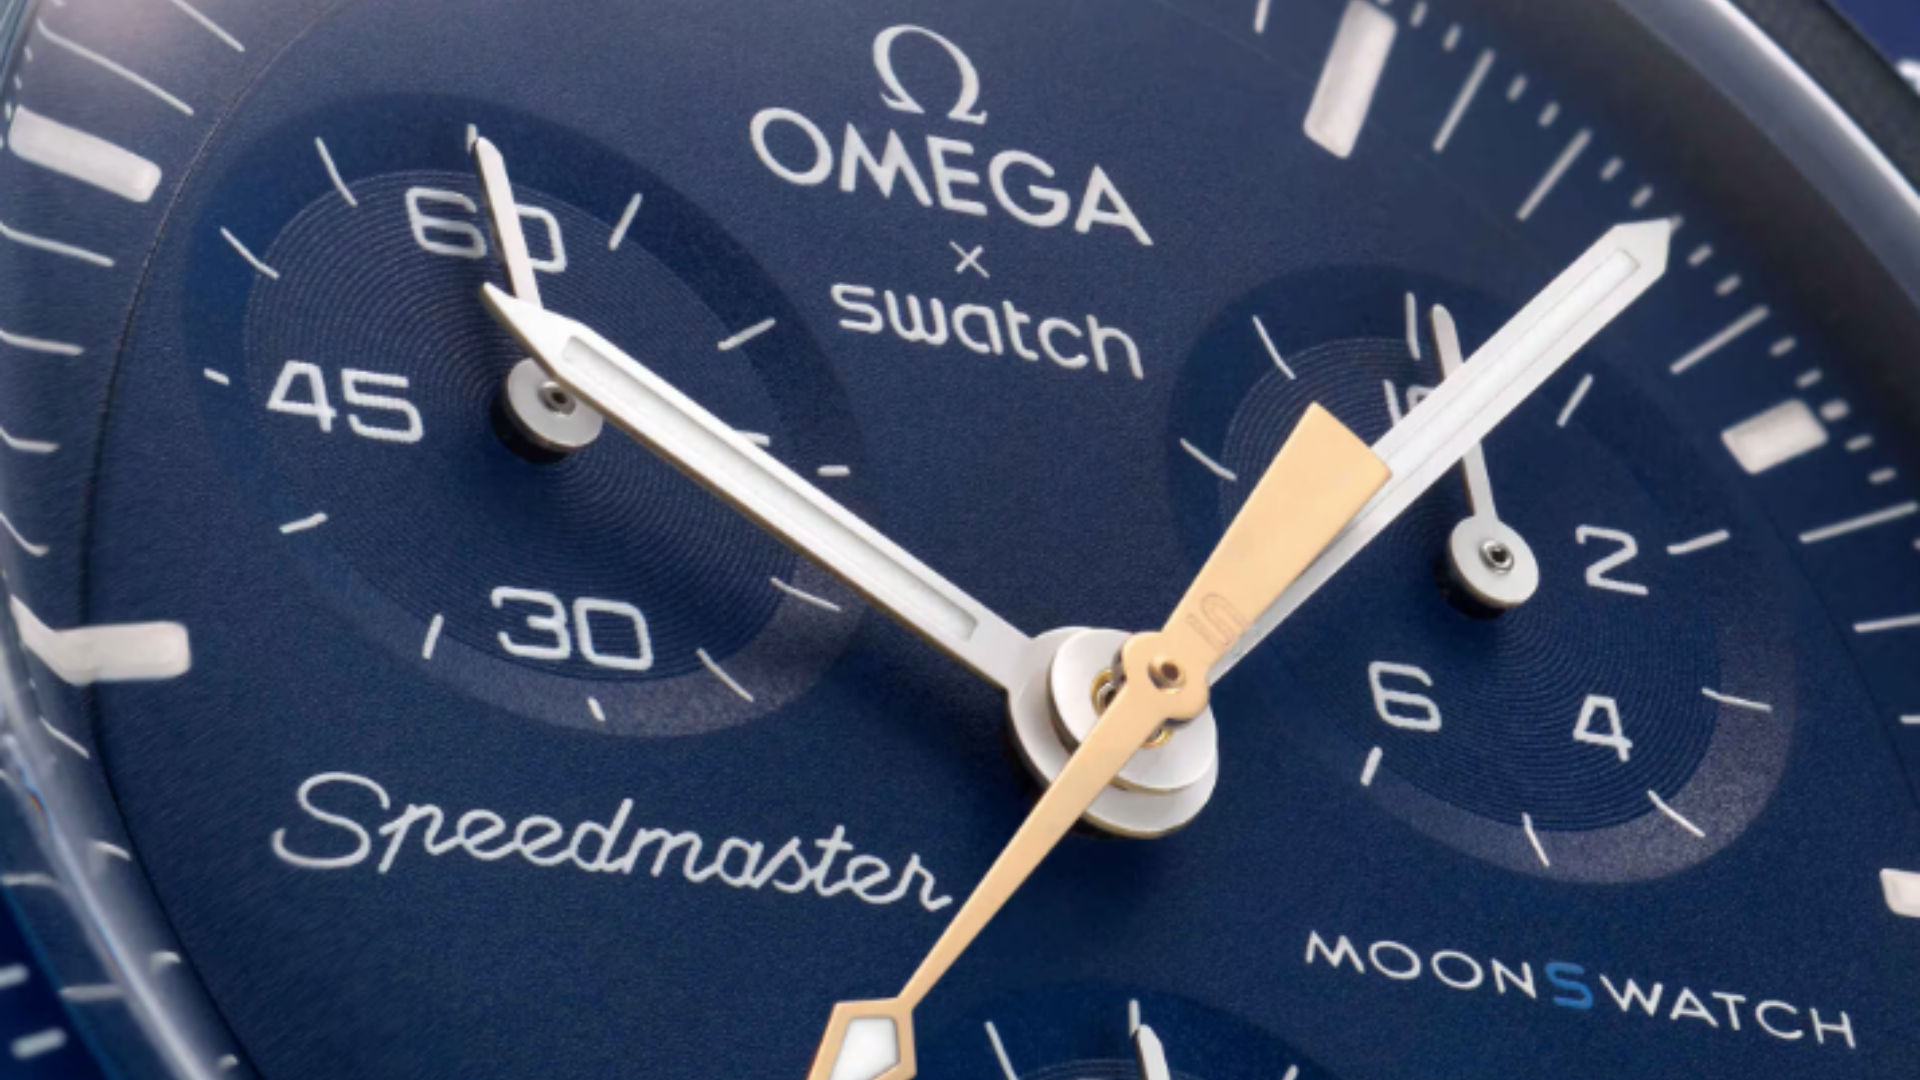 All About the Omega x Swatch Moonswatch Moonshine Gold Auction